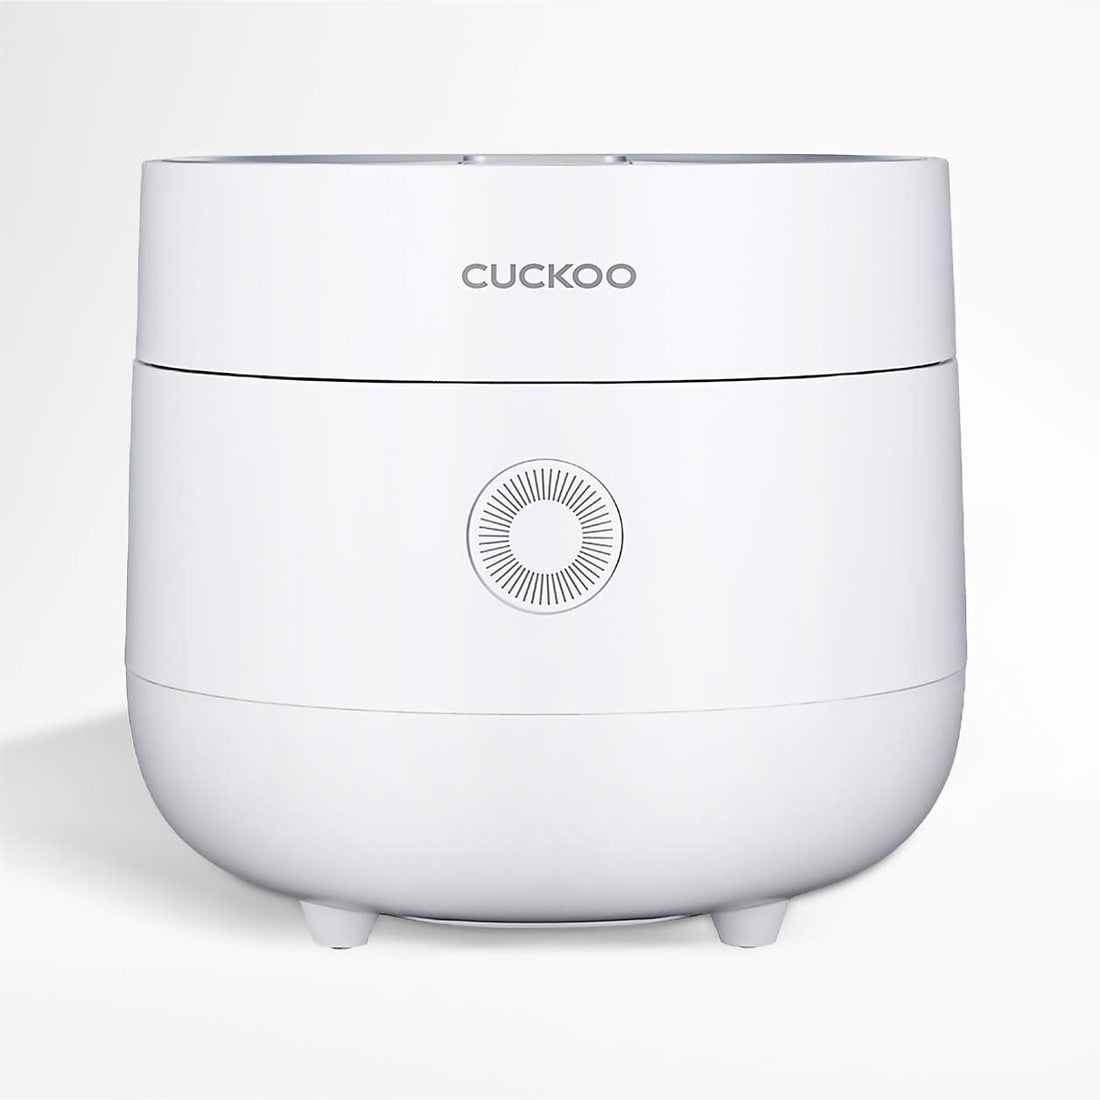 Cuckoo pressure rice cooker that uses all around induction heater to cook the price to perfection. It has 9 different settings to cook different grains, and you can select these using a touch screen. So whether you want regular white rice, brown rice, quinoa, porridge, or risotta this rice cooker can do it all. 